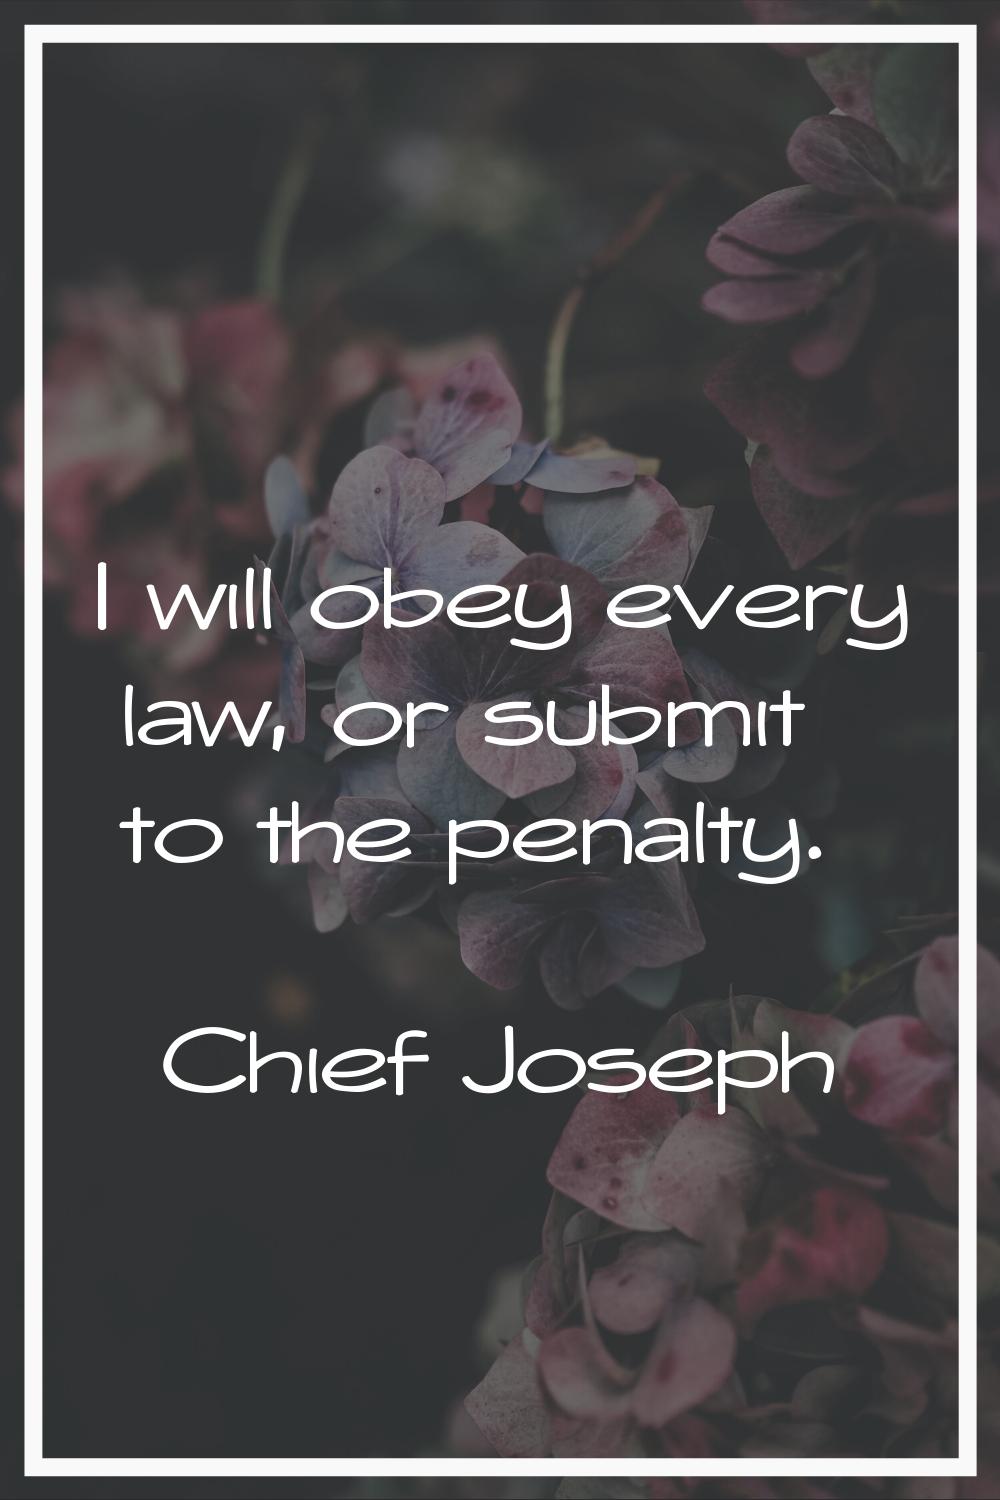 I will obey every law, or submit to the penalty.